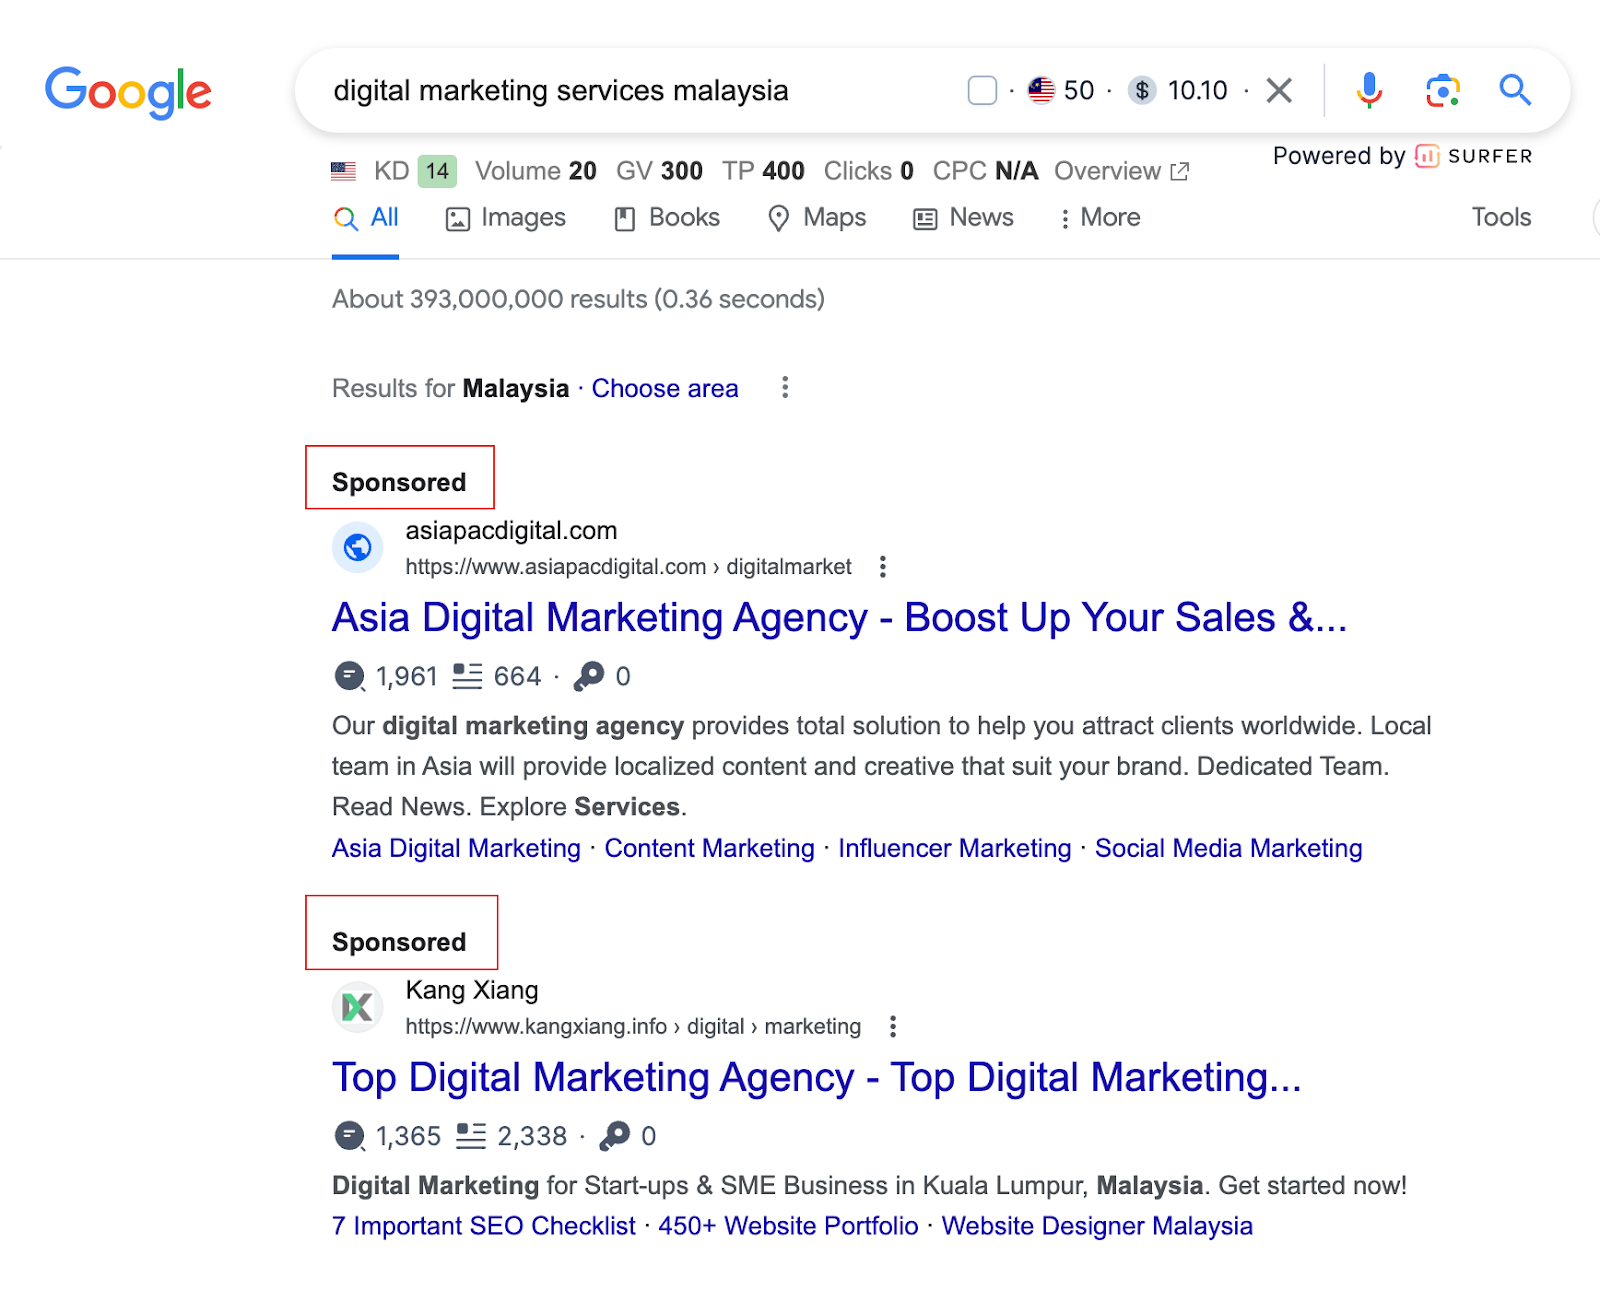 Sponsored or Ads label for Google Ads in SERP